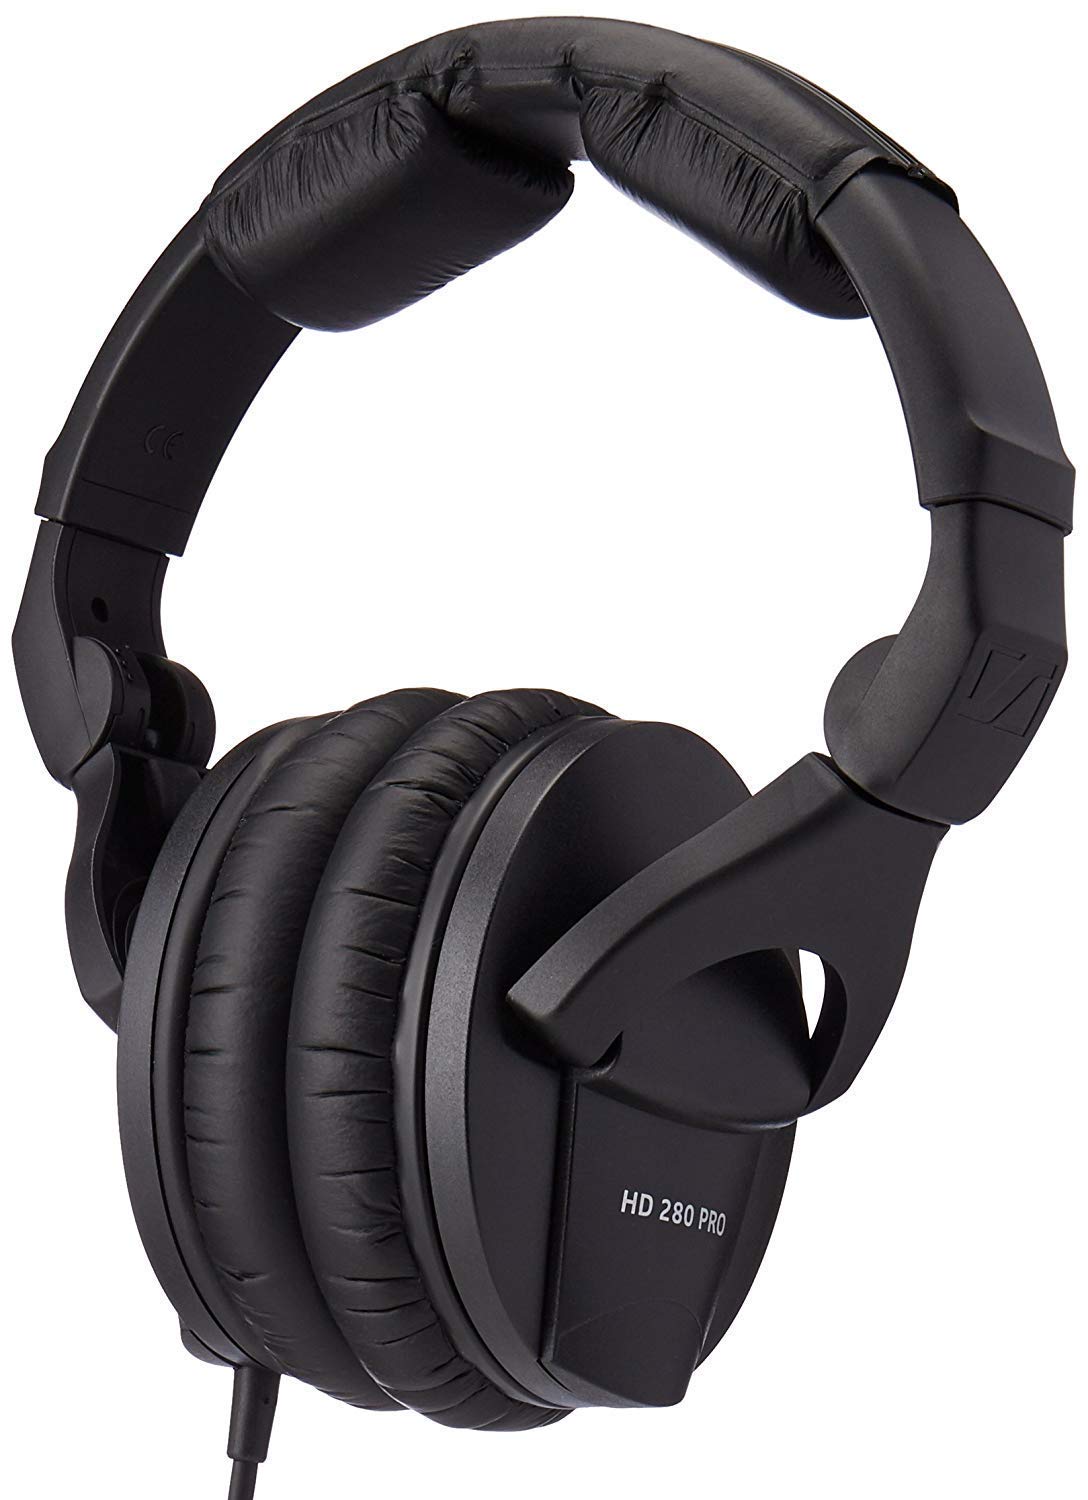 Sennheiser HD 280 PRO Over-Ear Headphones. Most significant closed, around-the-ear headphone to be introduced in years ideal for Home & Recording studio, DJ's, Mixing and Listening Music